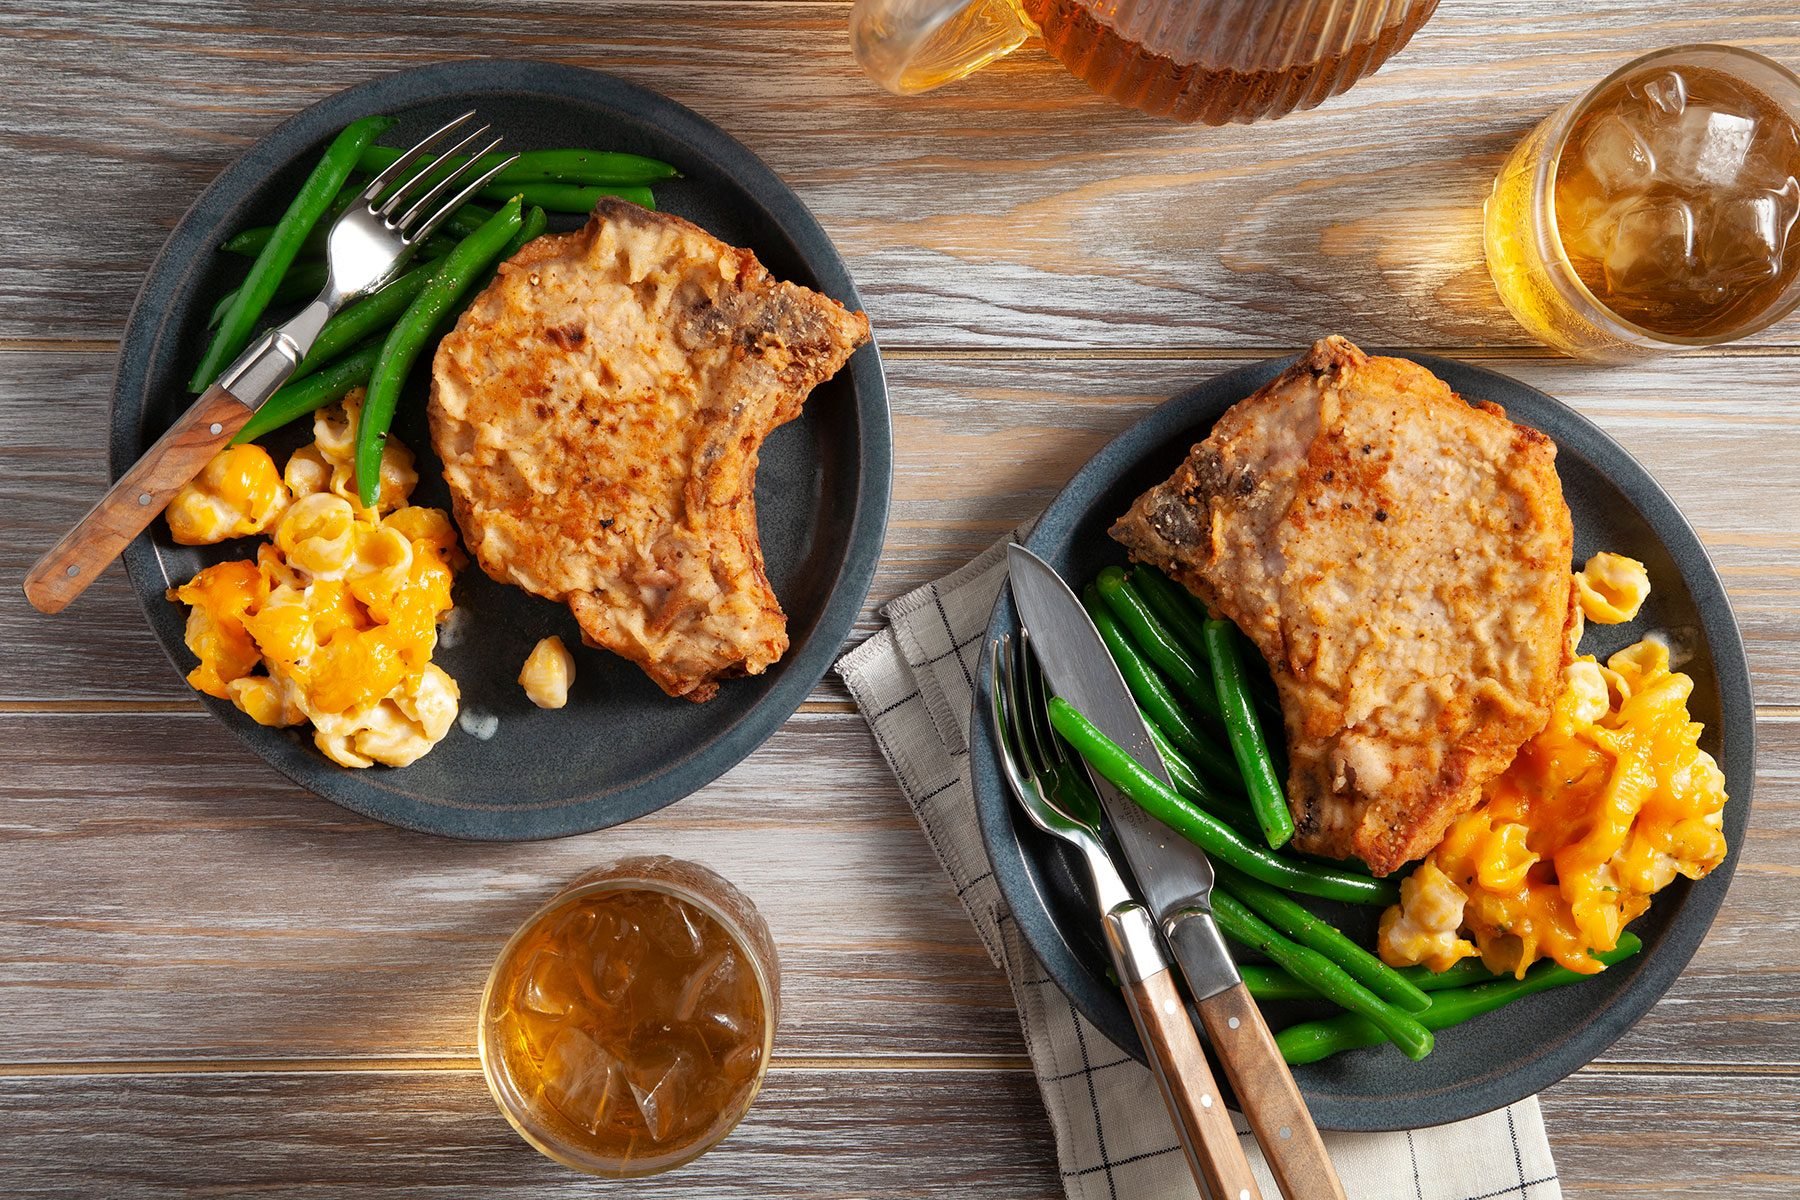 Southern Fried Pork Chops Recipe: How to Make It